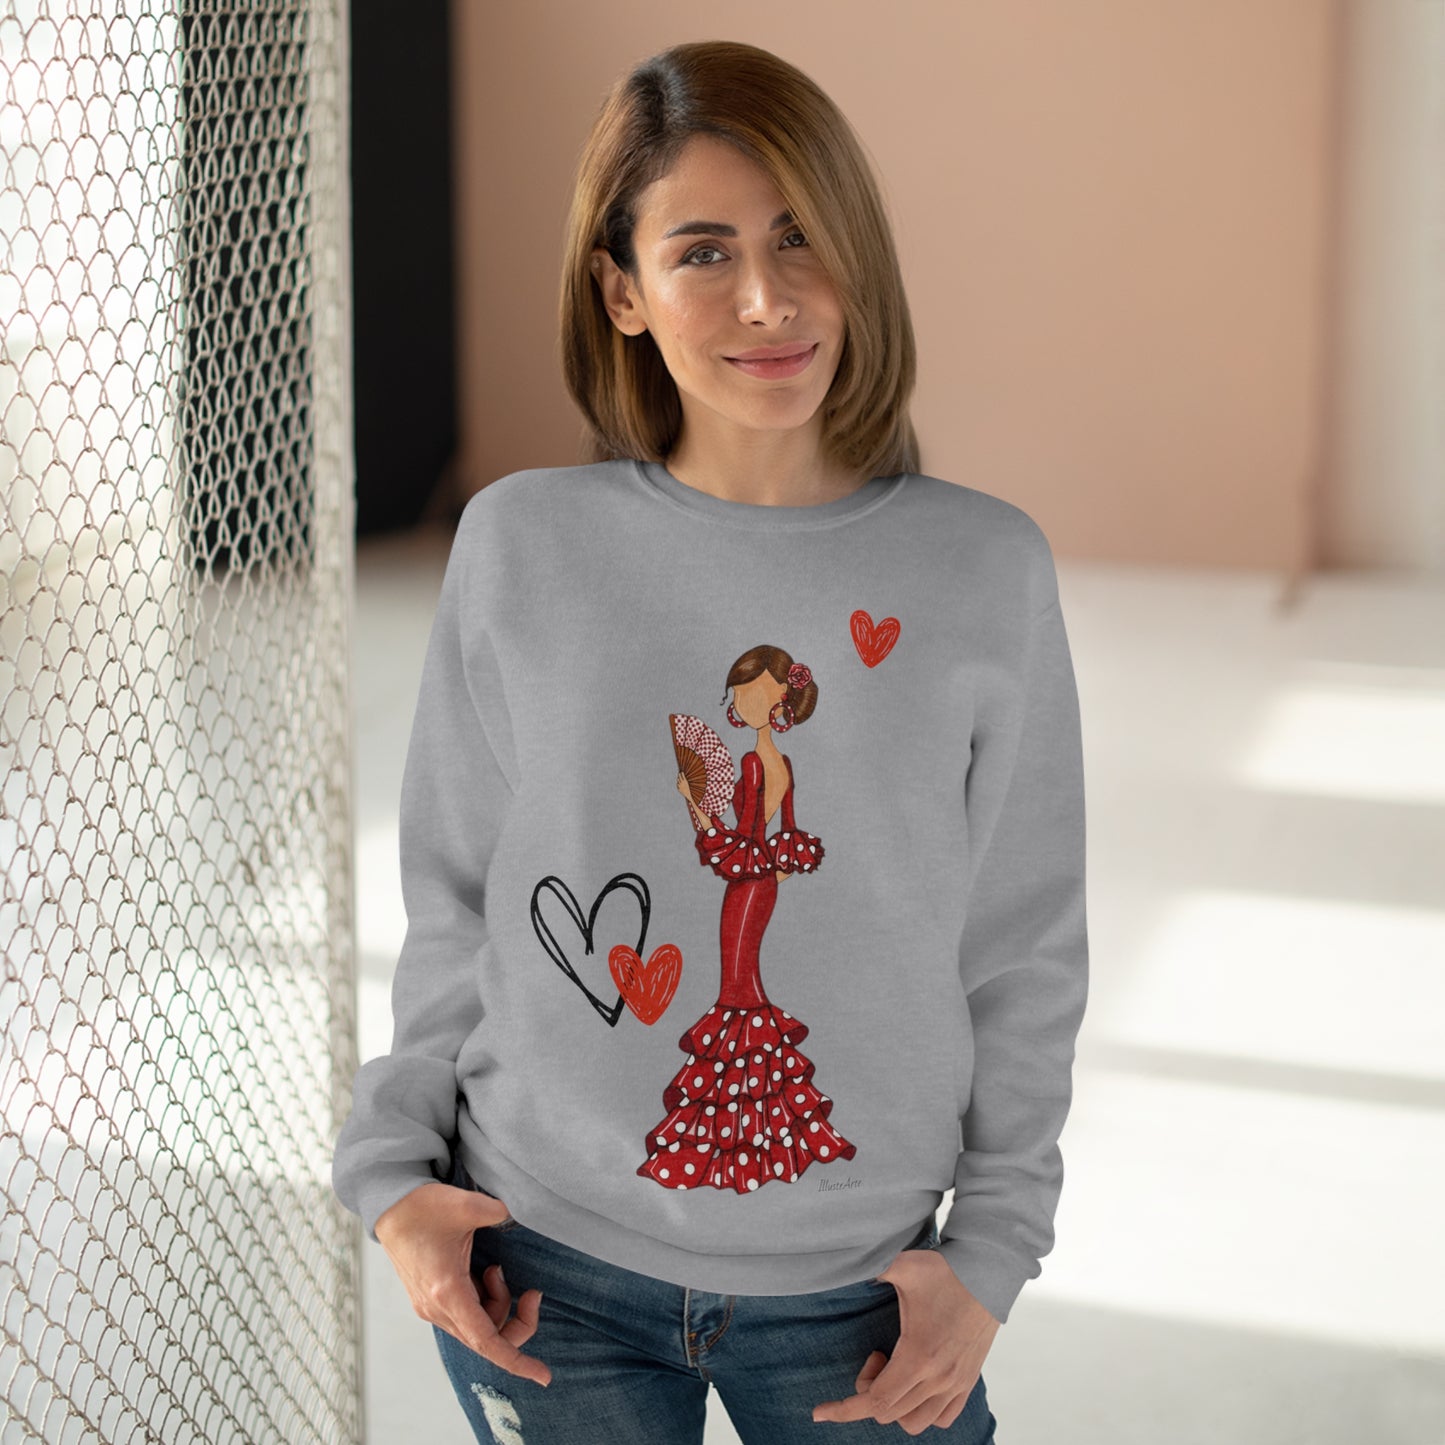 a woman wearing a sweater with a picture of a woman holding a heart